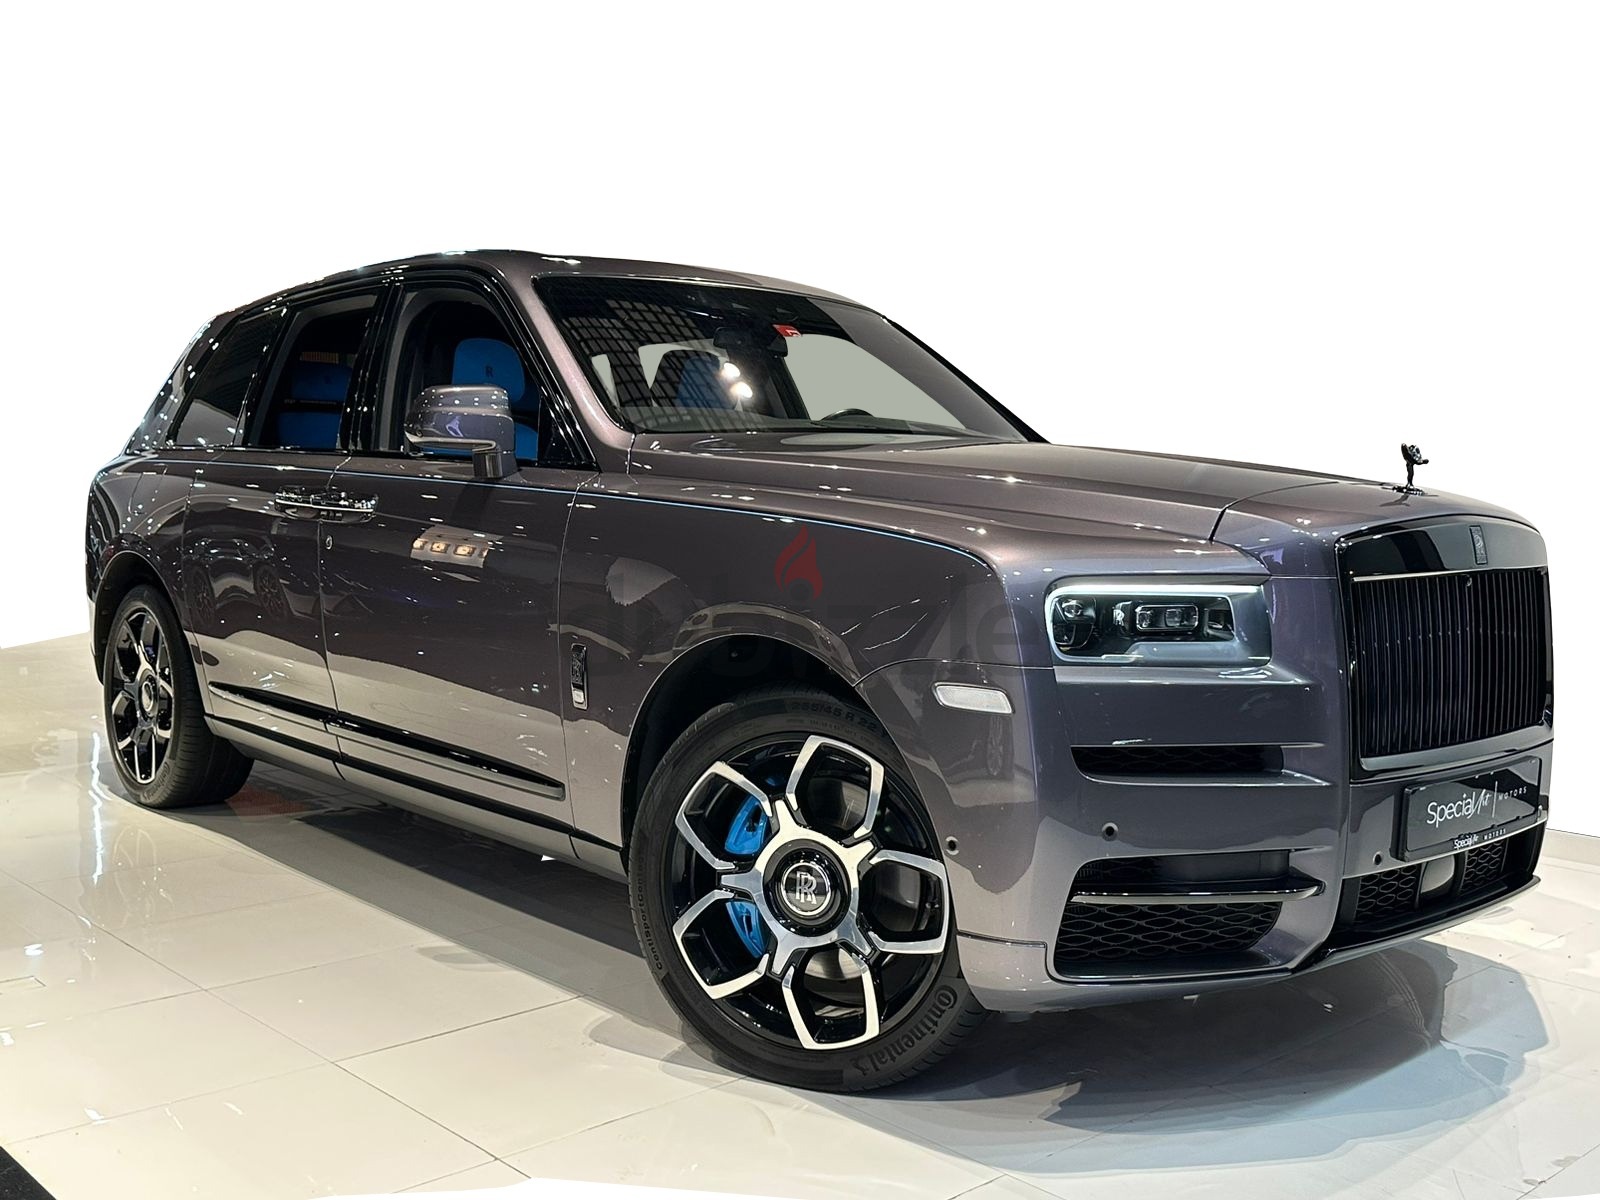 Moment A Tricycle Crashes Into A 350 Million RollsRoyce Cullinan